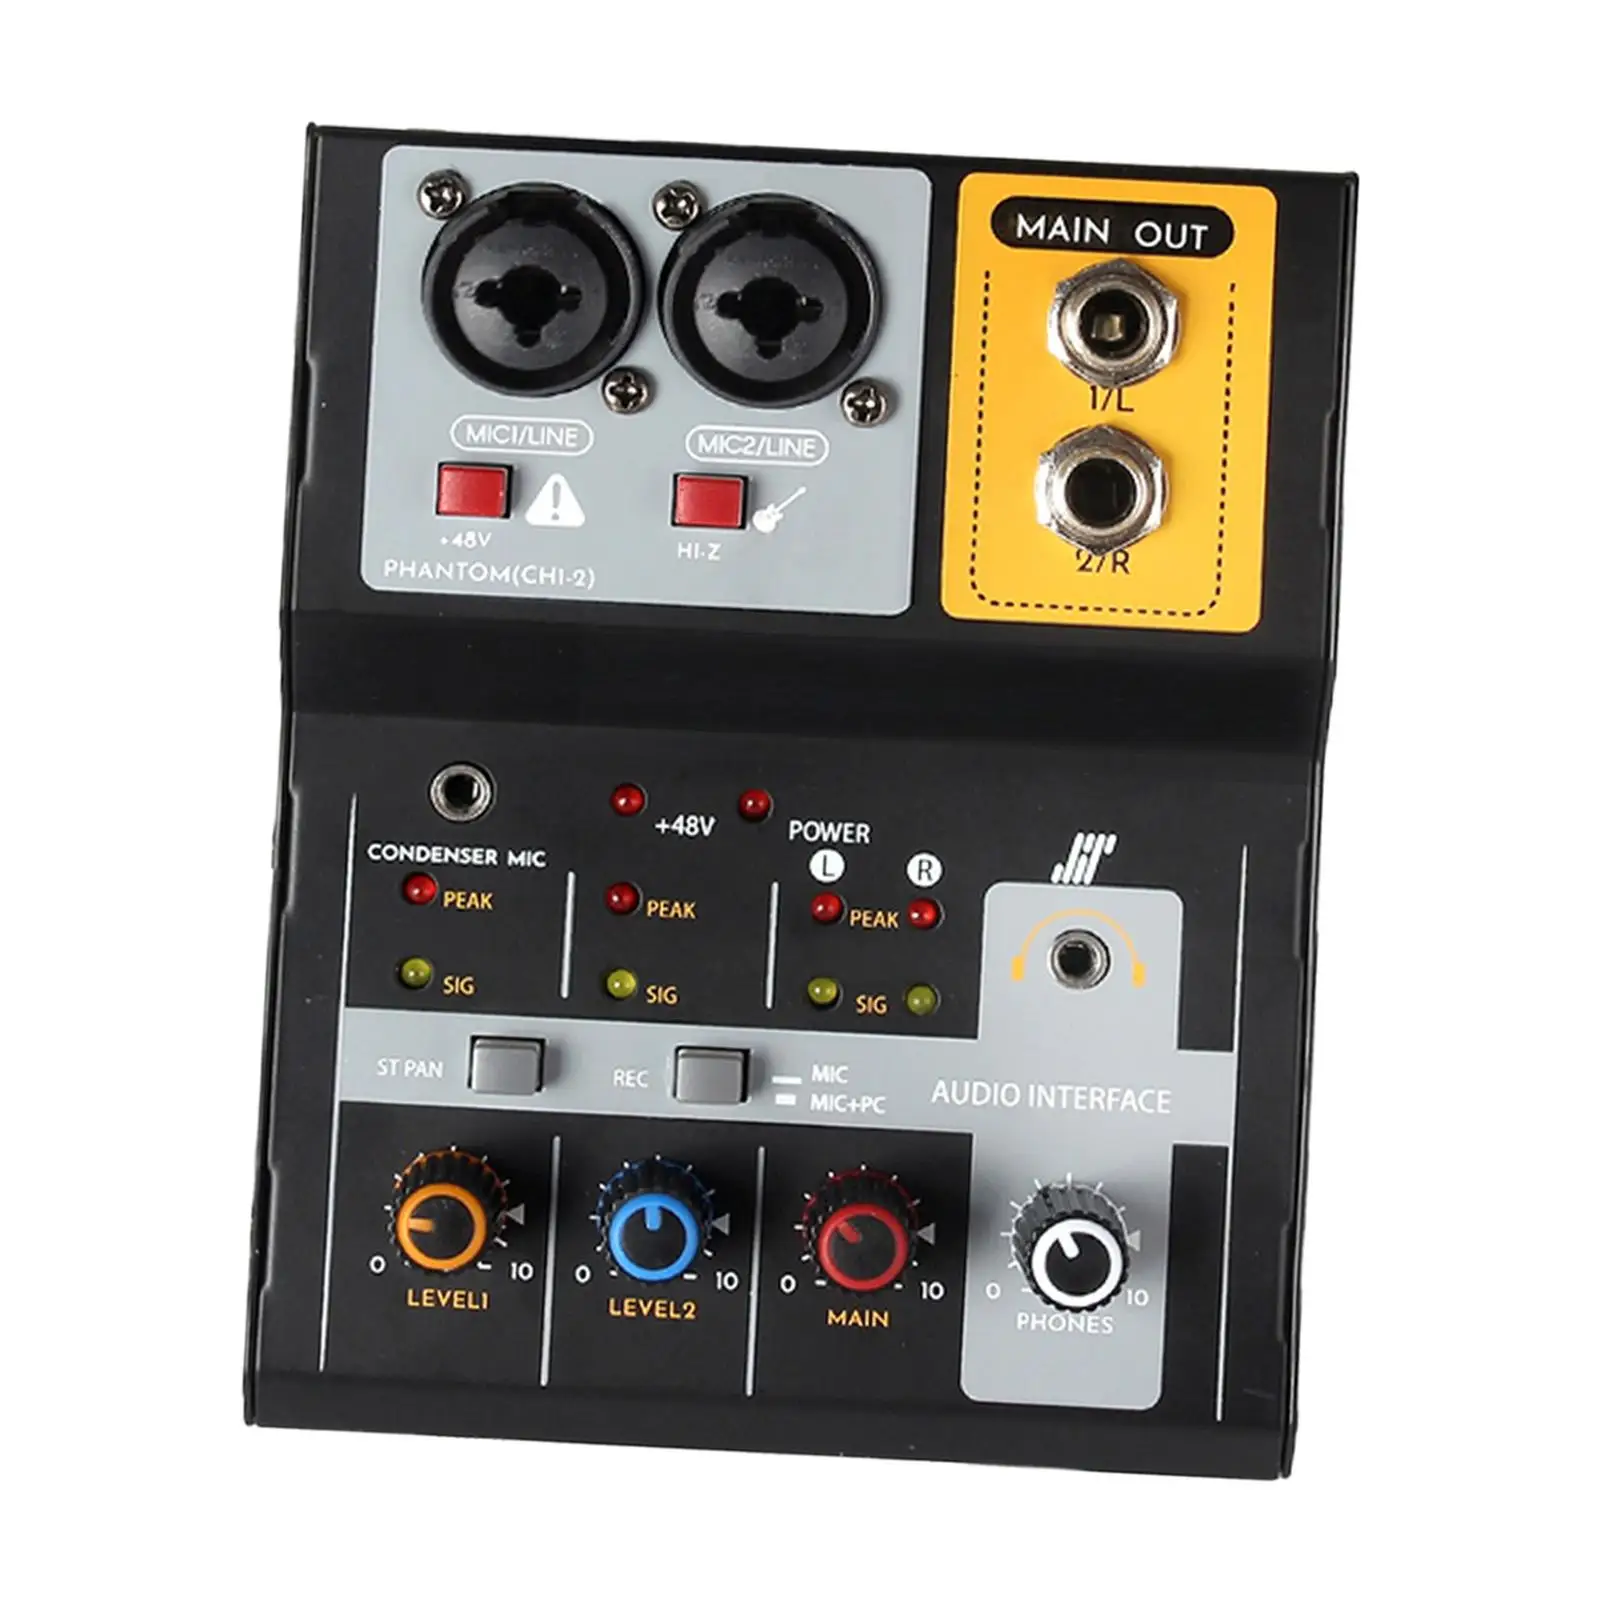 Audio Sound Mixer Stereo USB 48V Less Interference 2 Channel for Live Broadcast KTV Studio Show Podcasting Party Recording